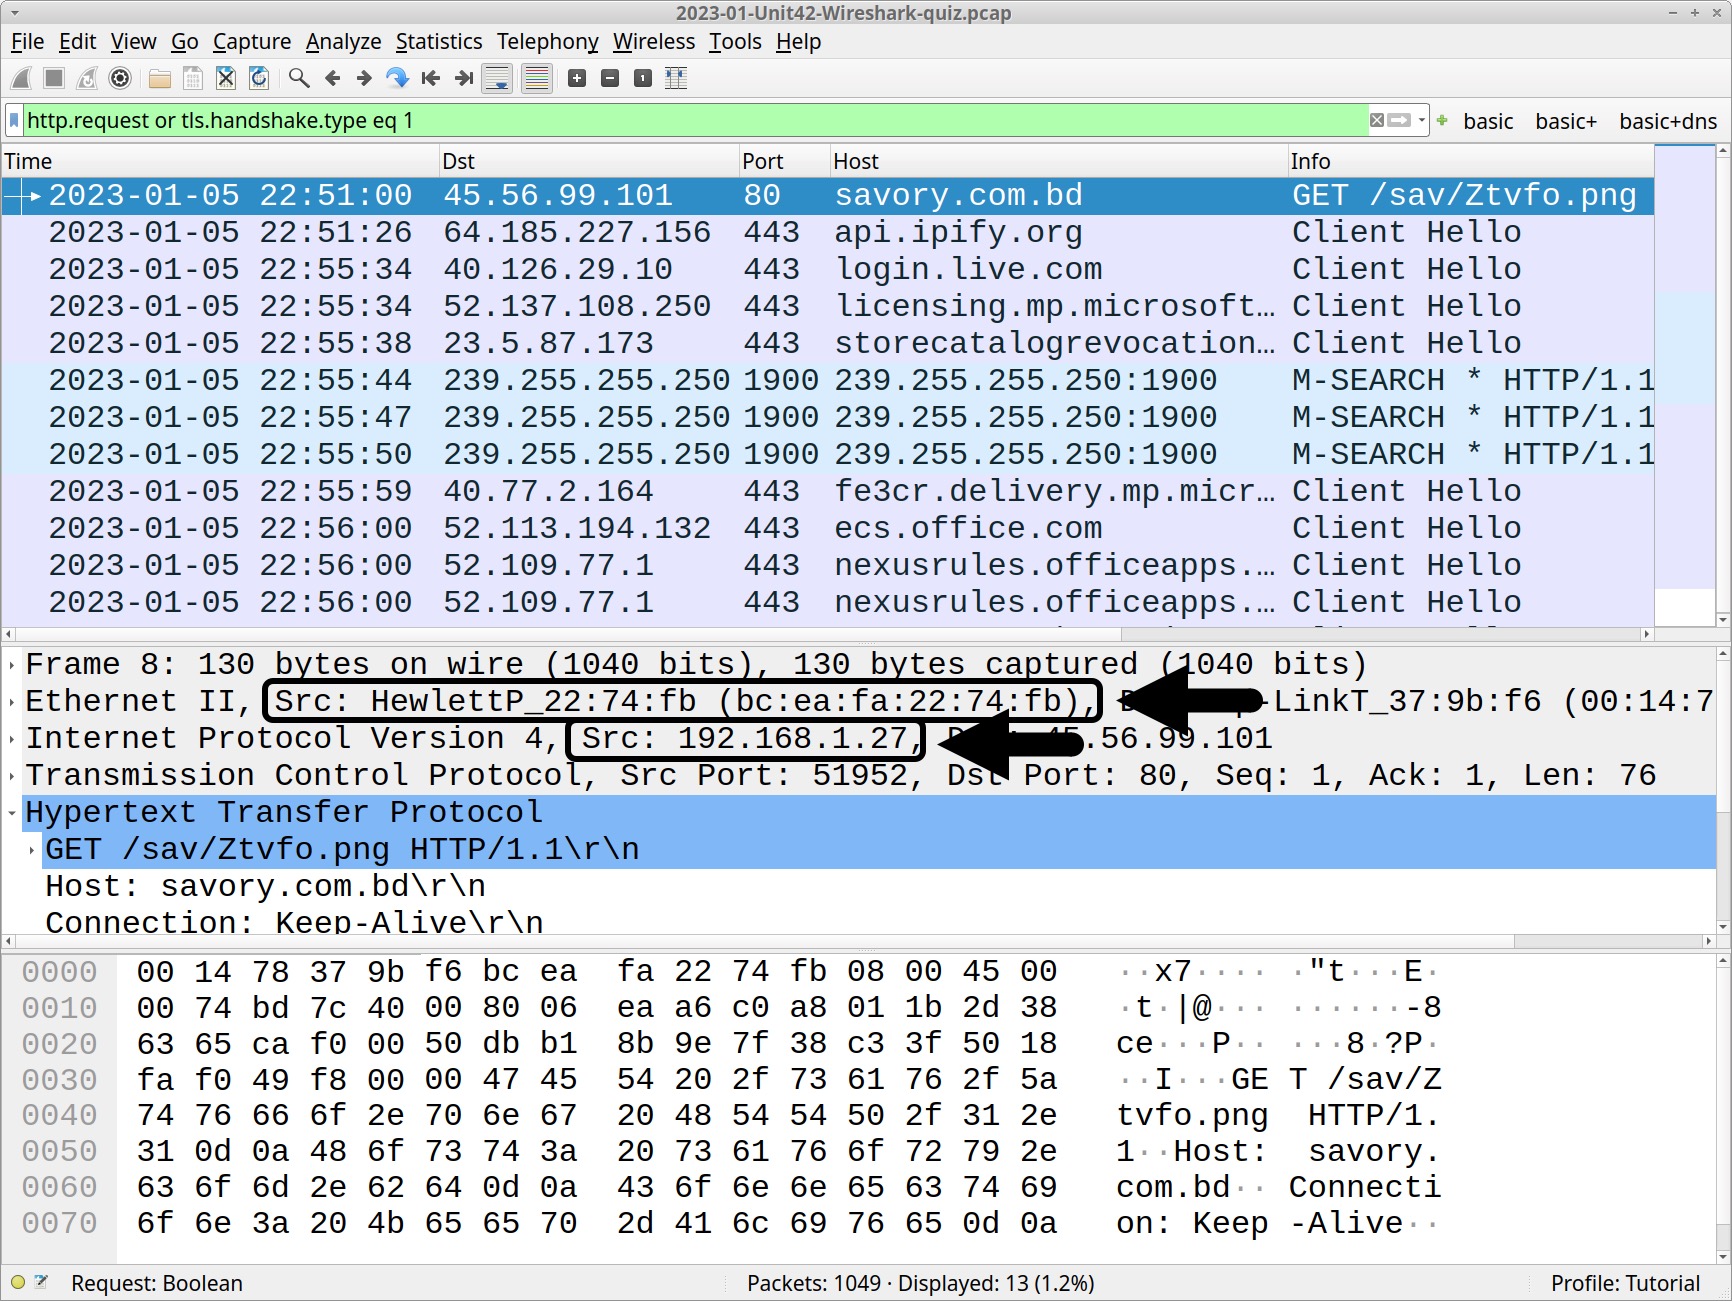 Image 2 is a screenshot of the Wireshark program. Highlighted in boxes and with arrows are the victim’s IP address and MAC address in the program.